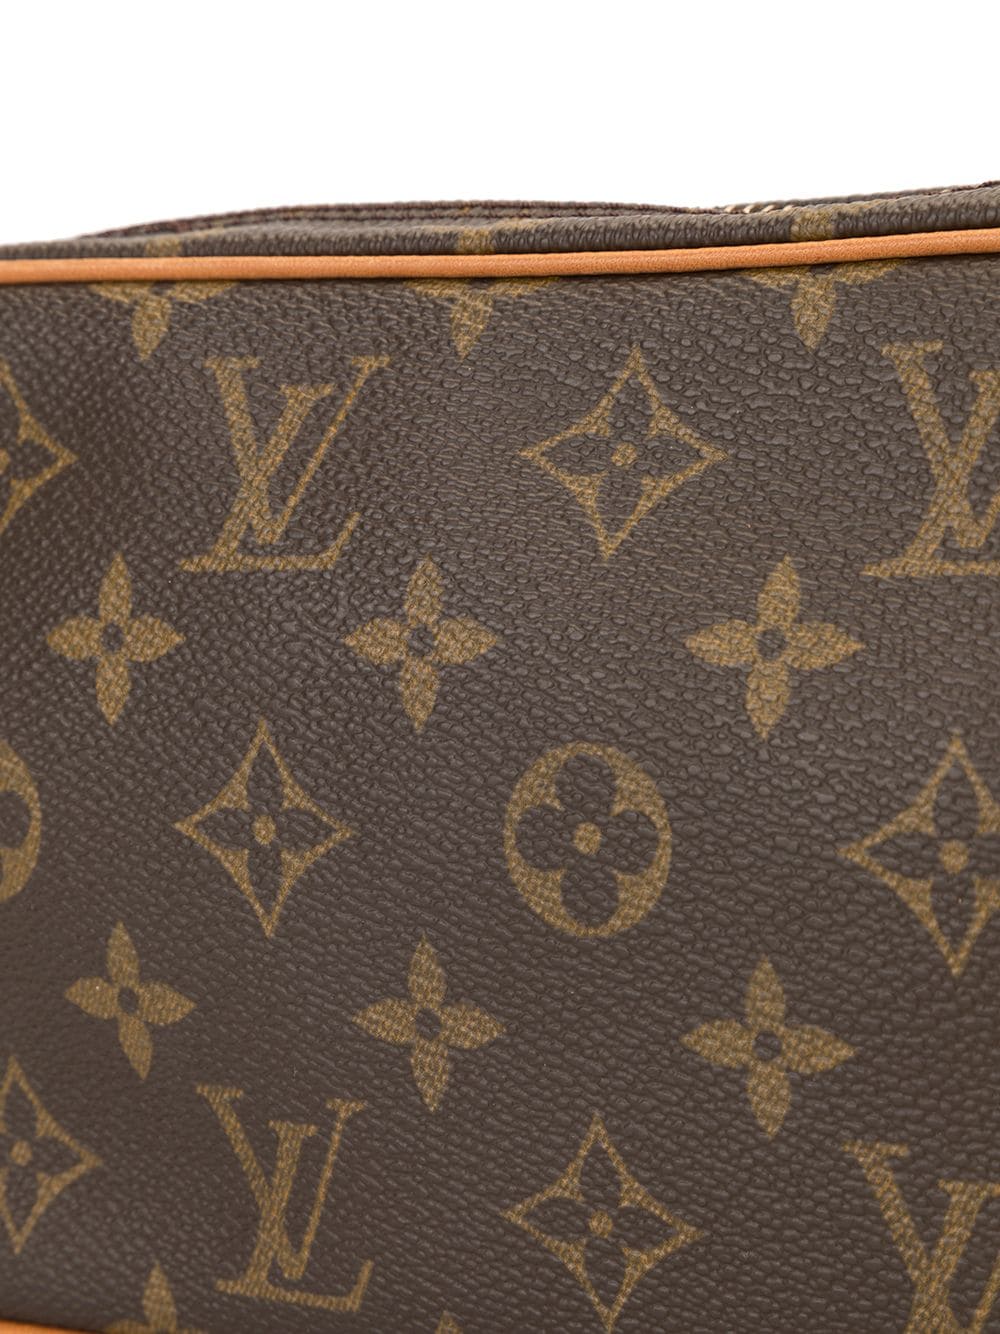 Louis Vuitton pre-owned Marly Crossbody Bag - Farfetch